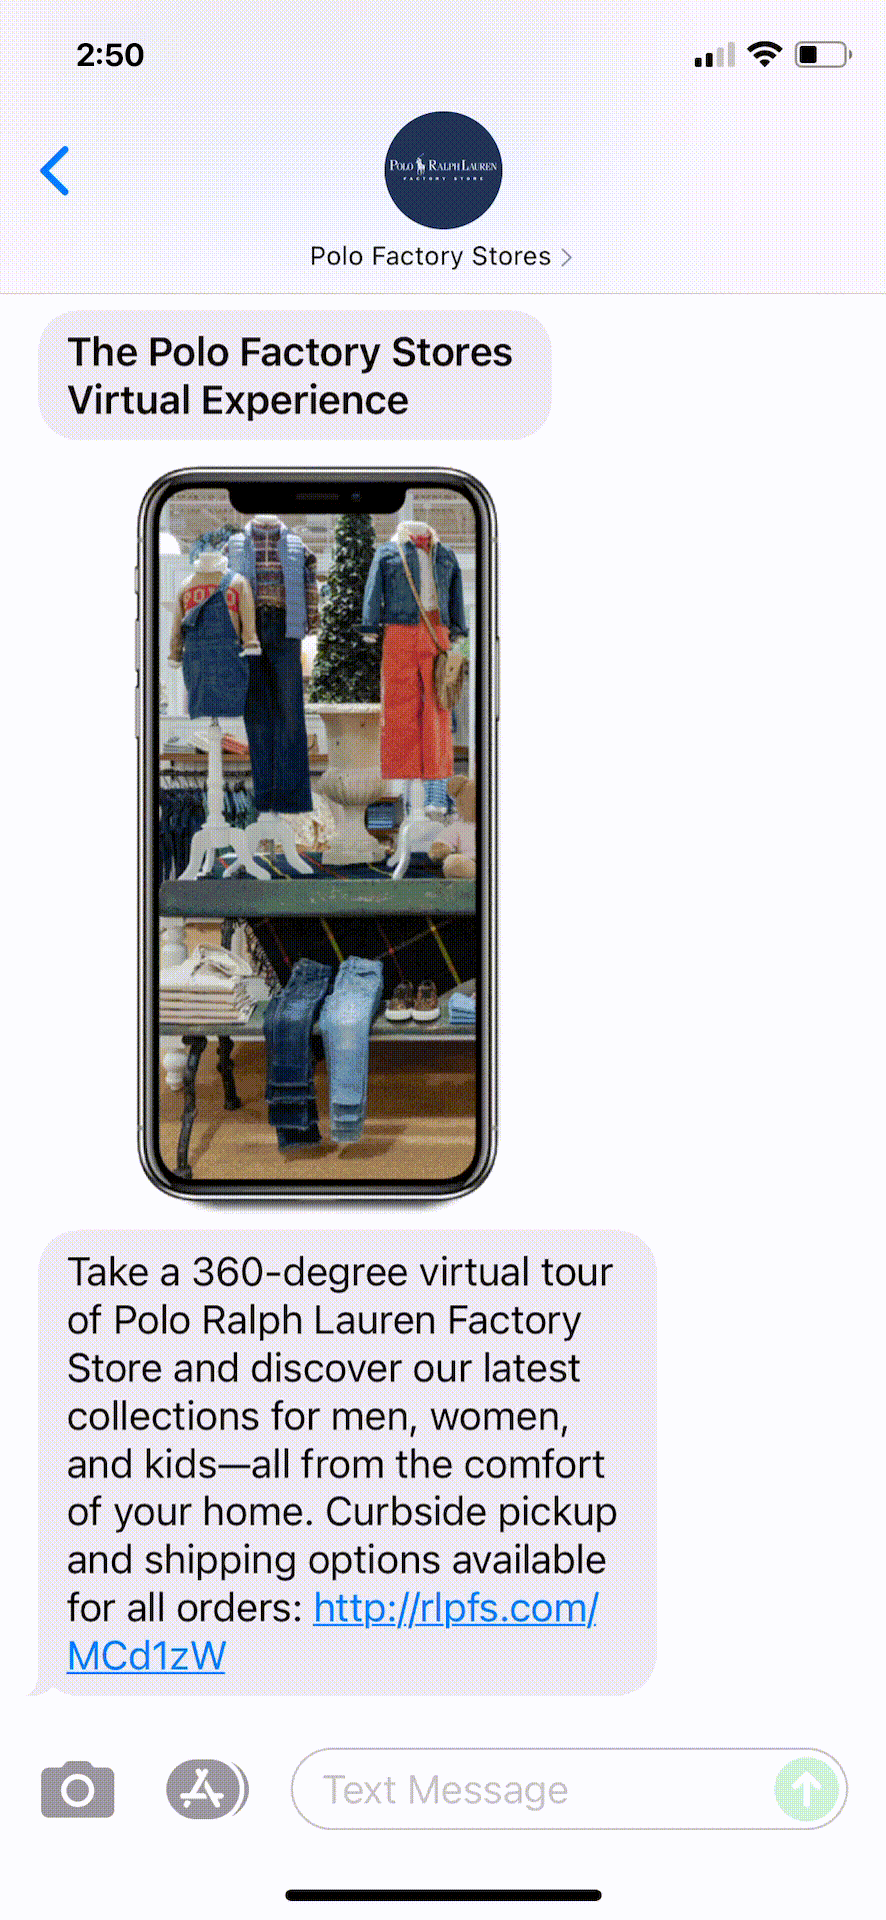 Polo-Factory-Stores-Text-Message-Marketing-Example-10.15.2021